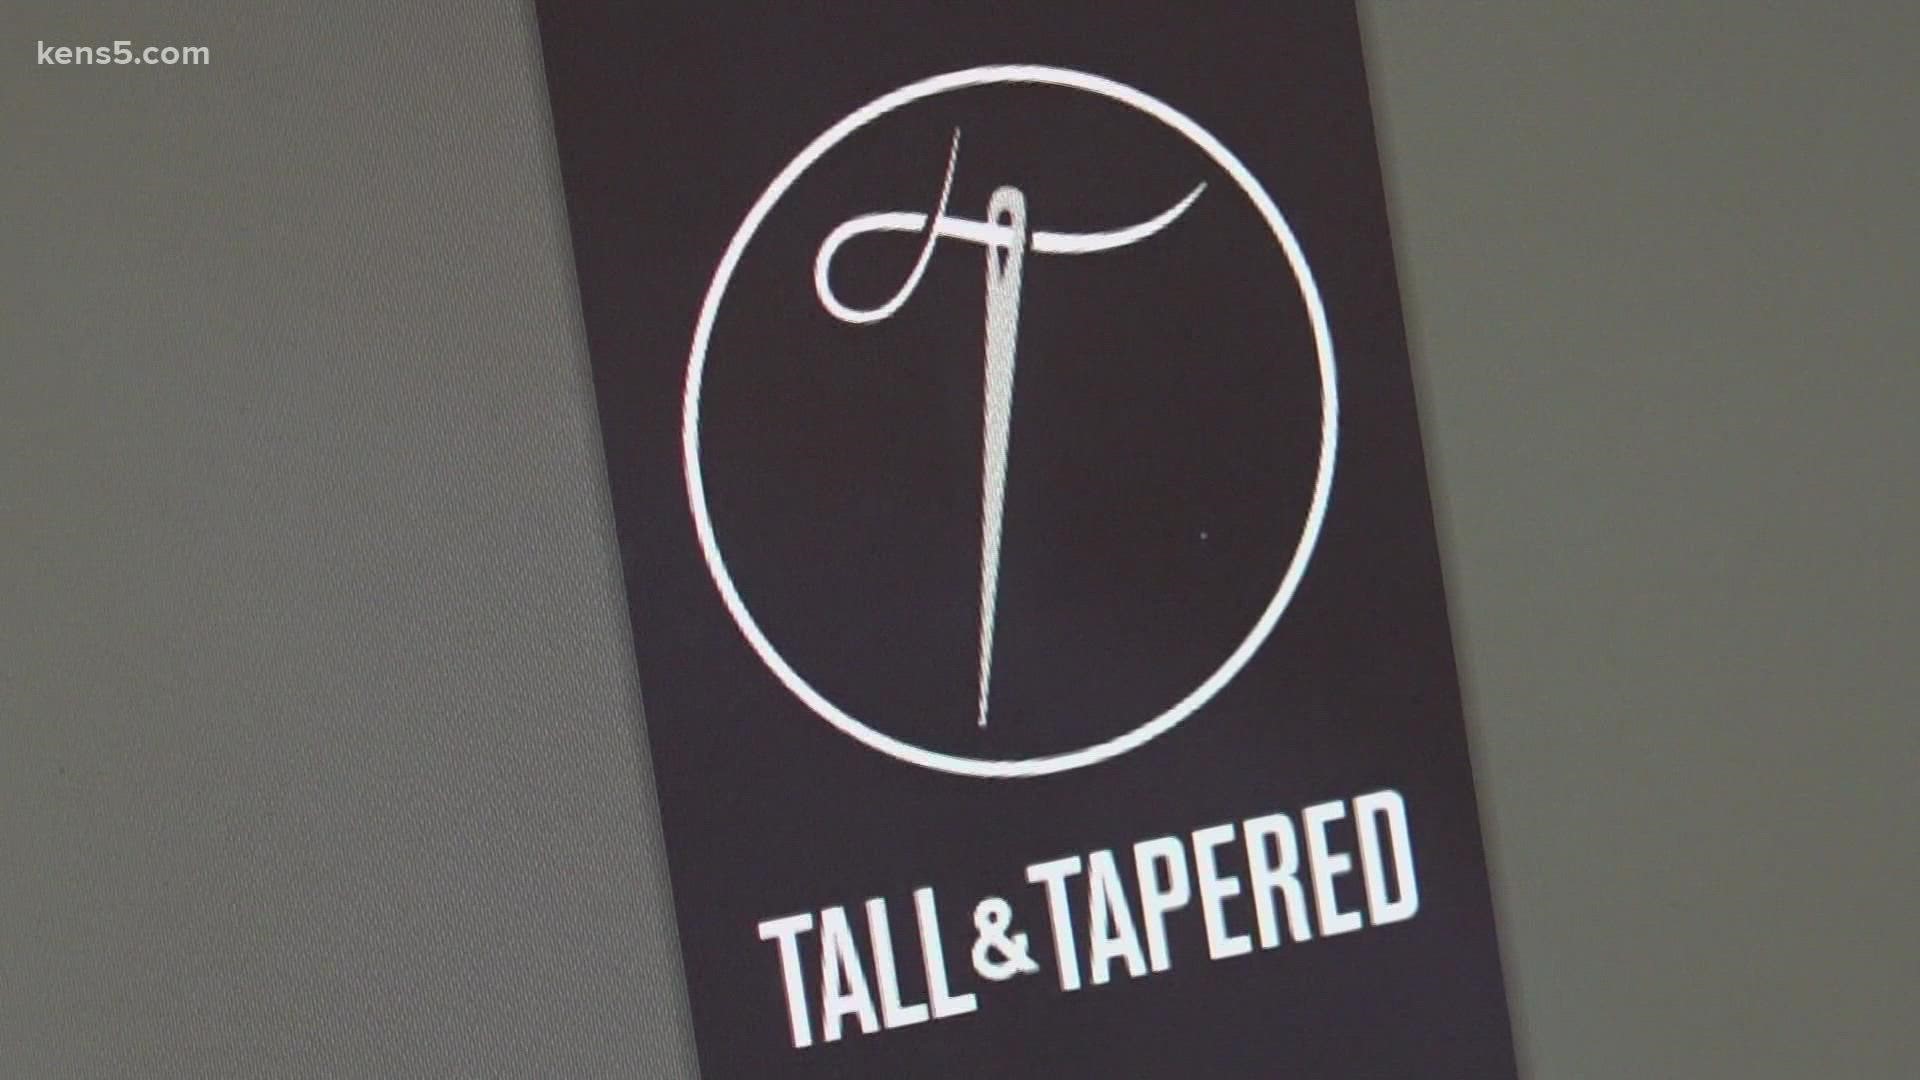 A 6'9" player for the San Antonio Missions created a clothing brand to help tall individuals find clothes that fit their frame.